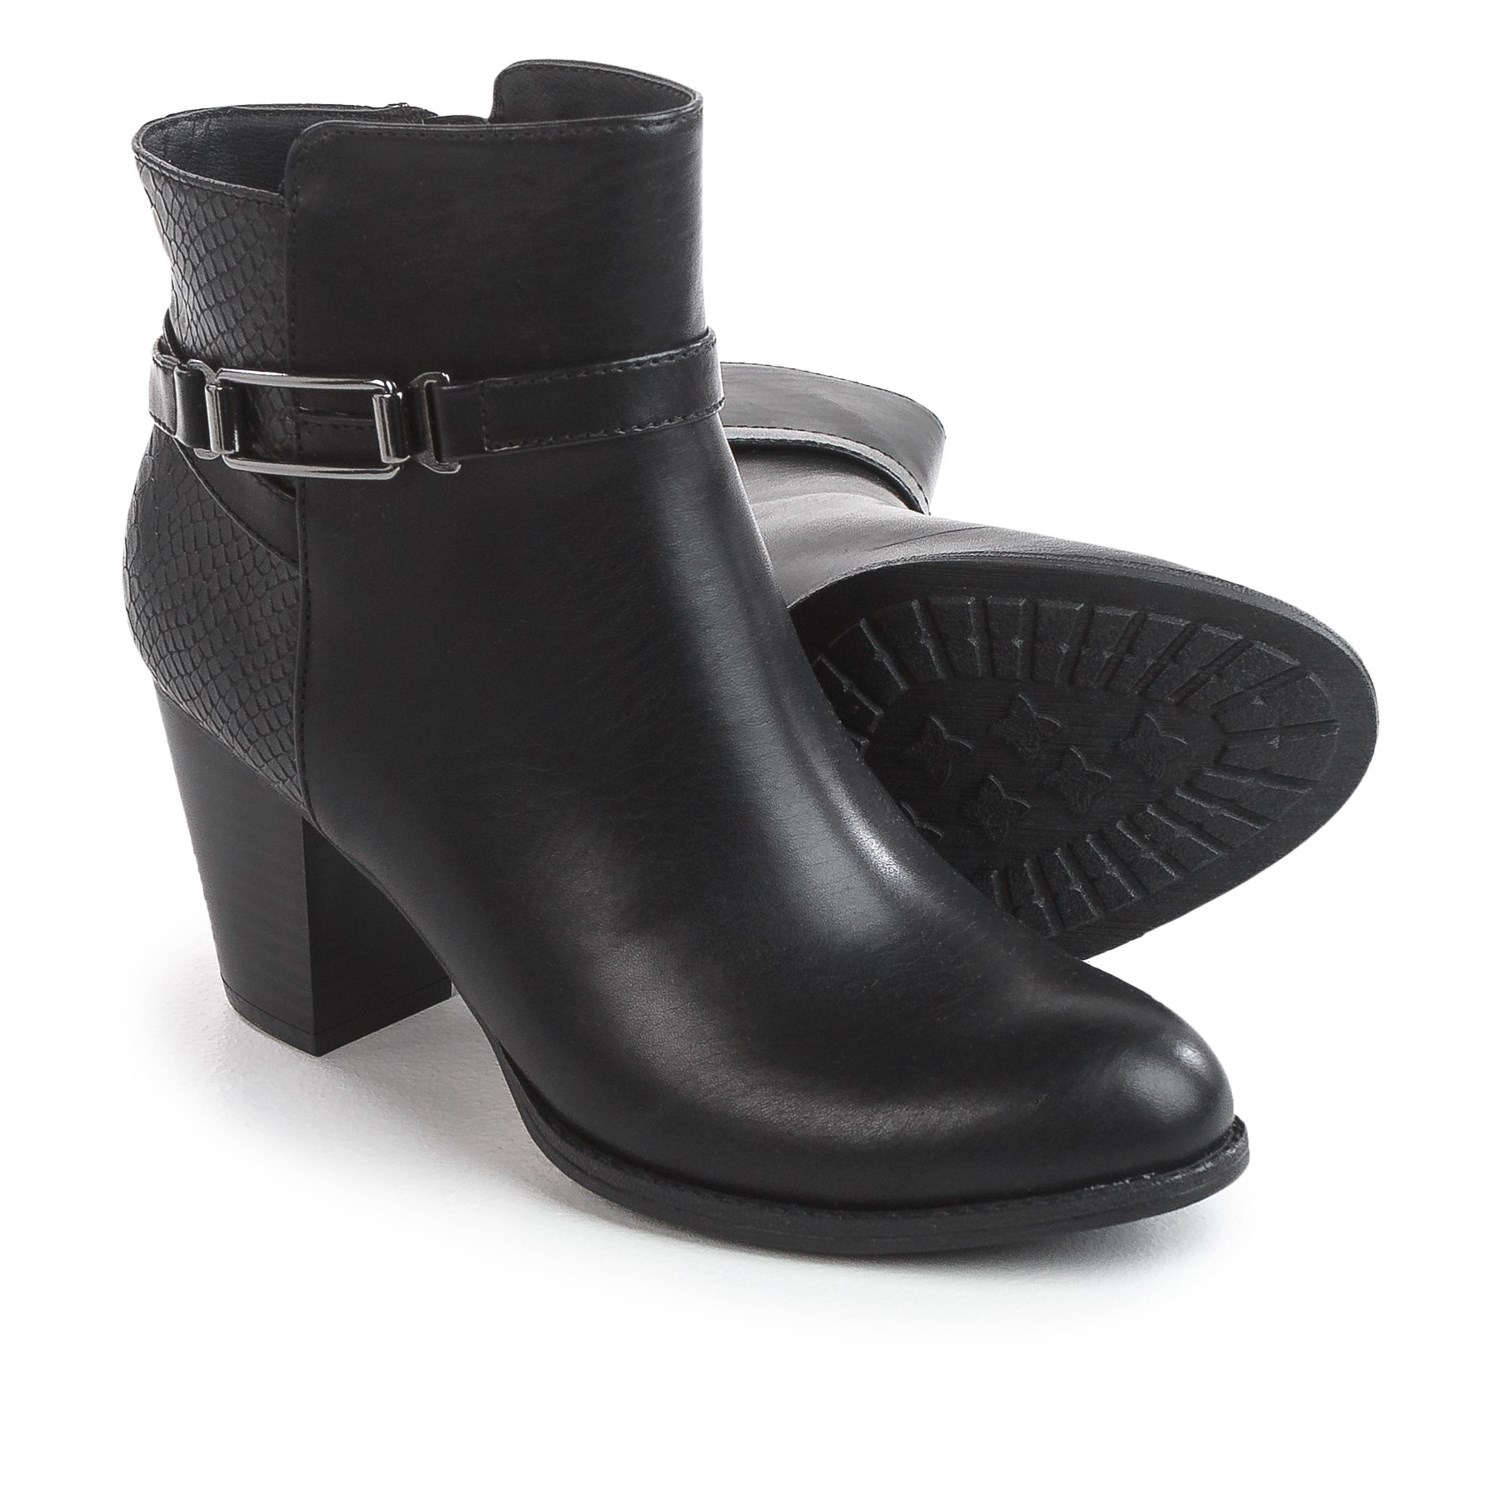 Eurosoft by Sofft Sigourney Ankle Boots – Faux Leather (For Women)